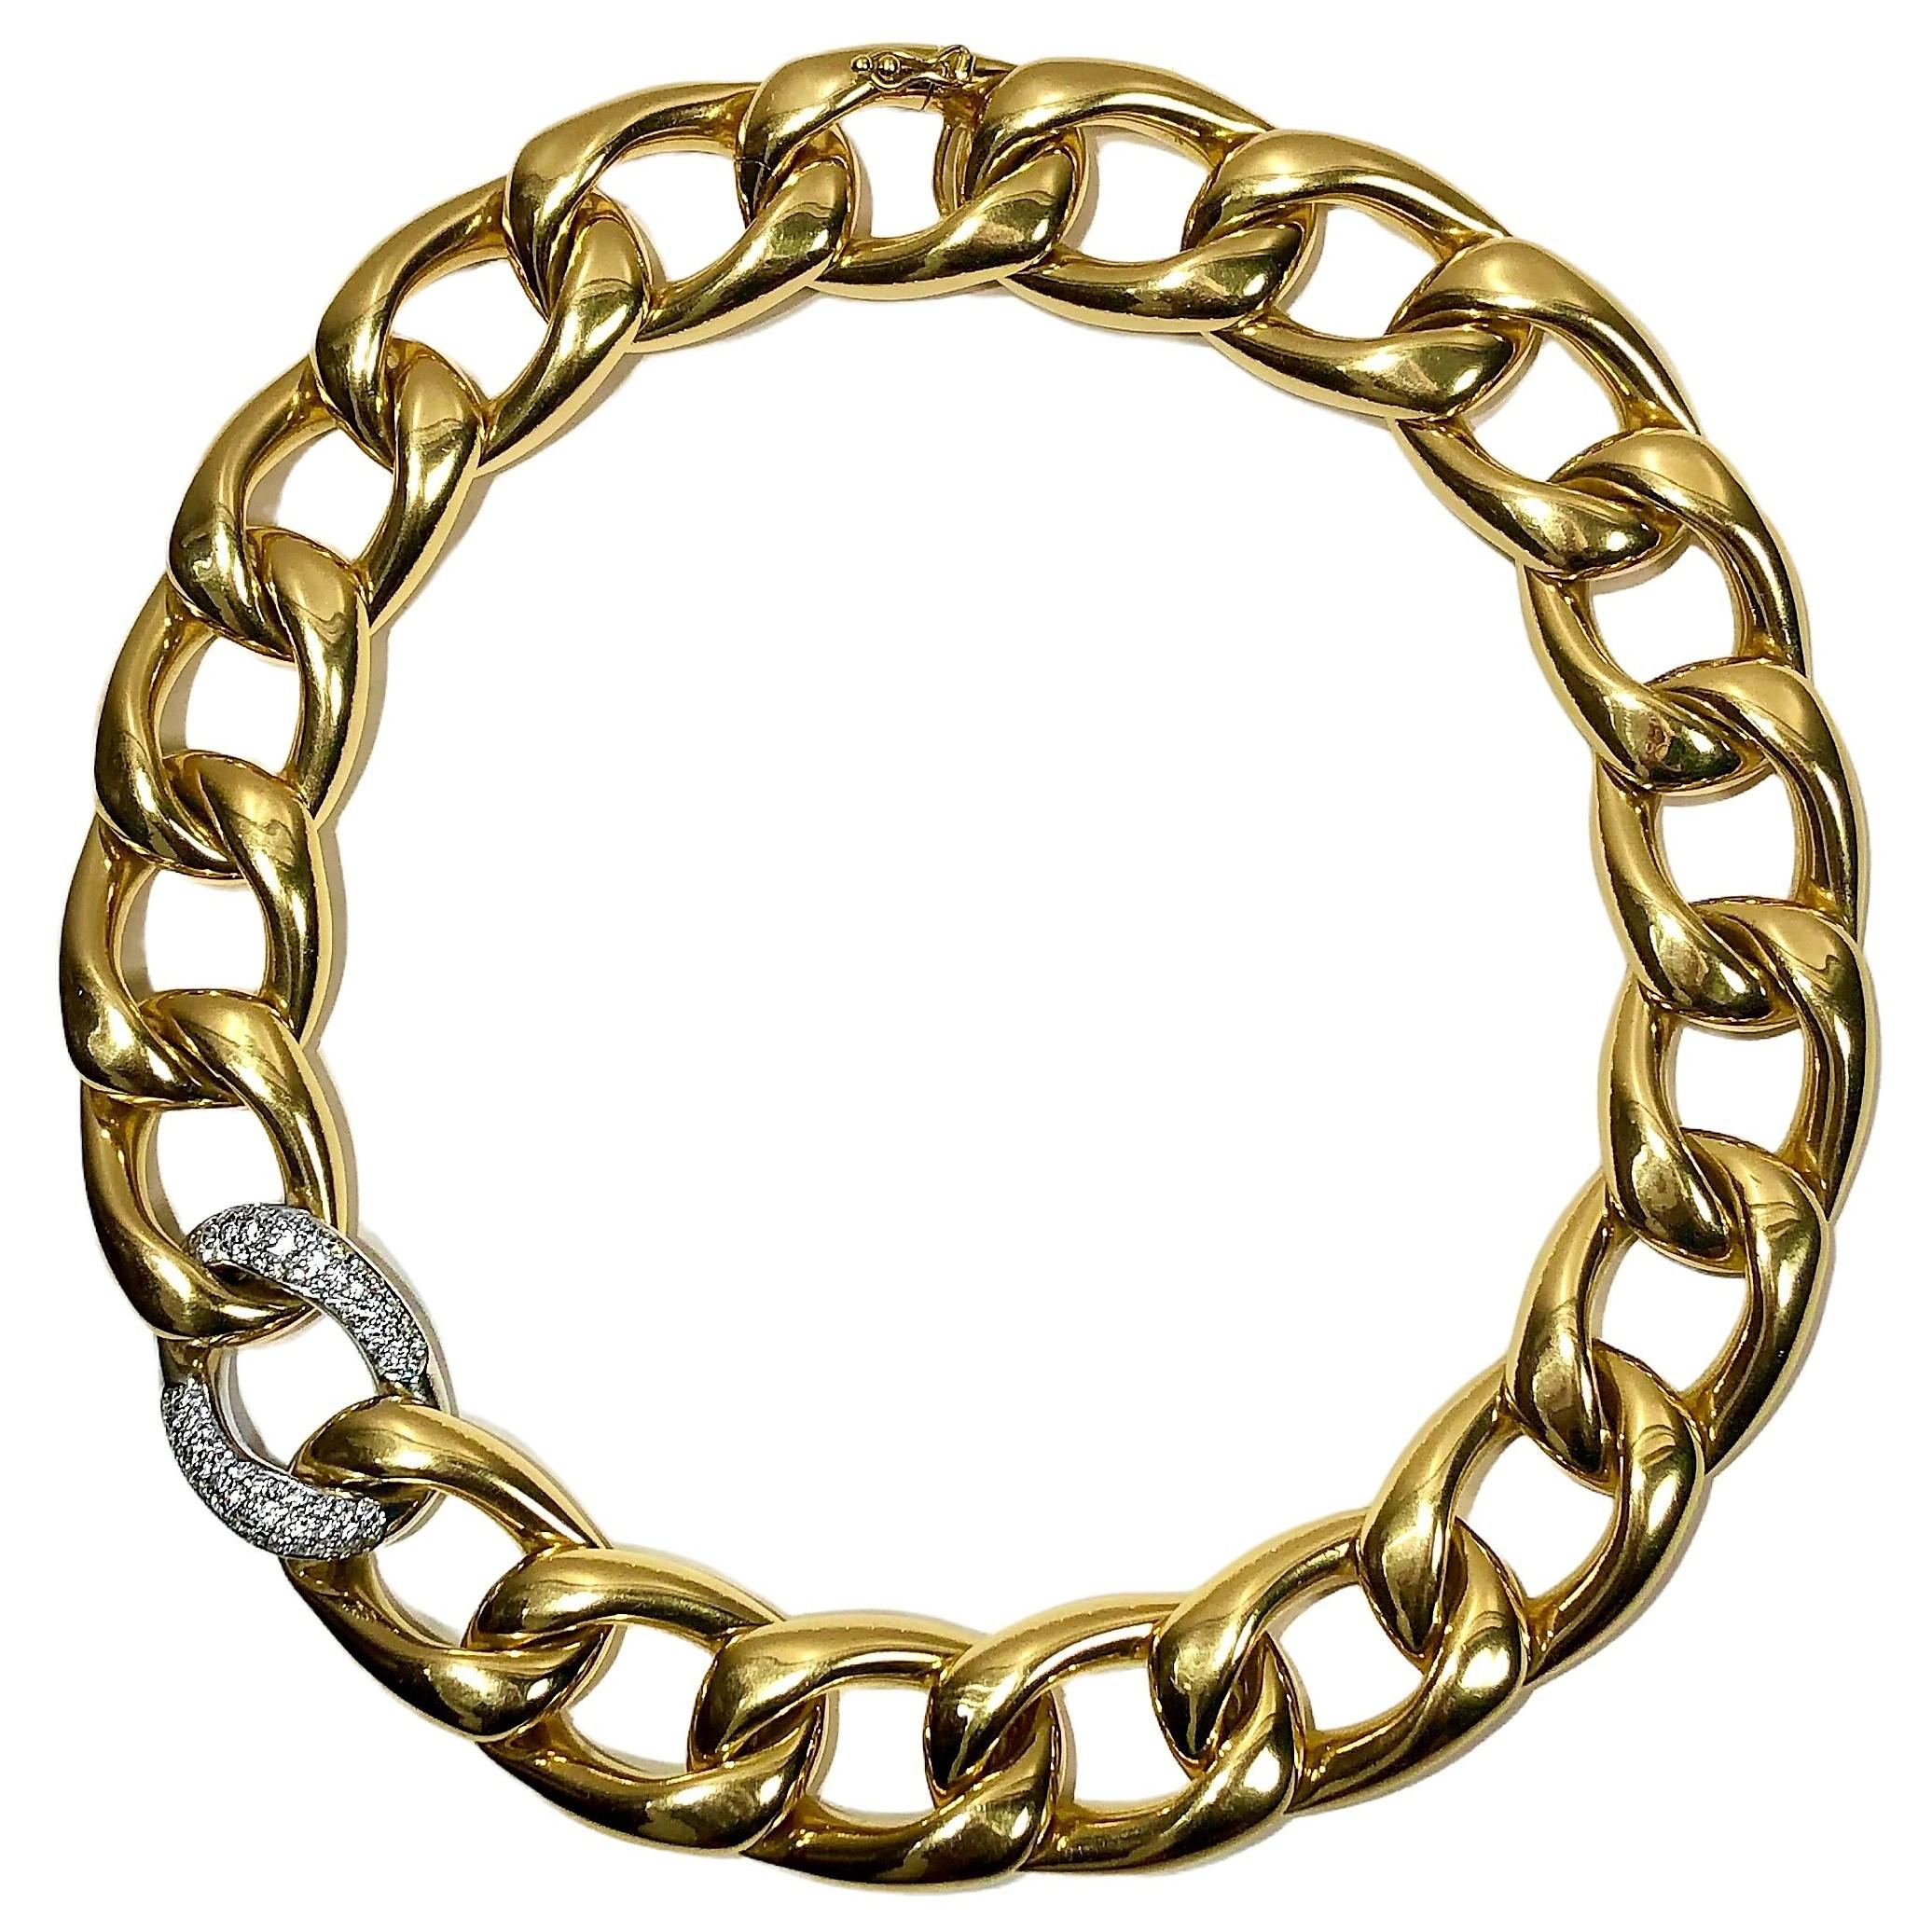 This finely crafted 18k yellow gold modified curb link necklace was created and released by venerated German maker, Abel & Zimmerman. It measures 16 inches in length and a very substantial 13/16 inches in width. The high quality and attention to